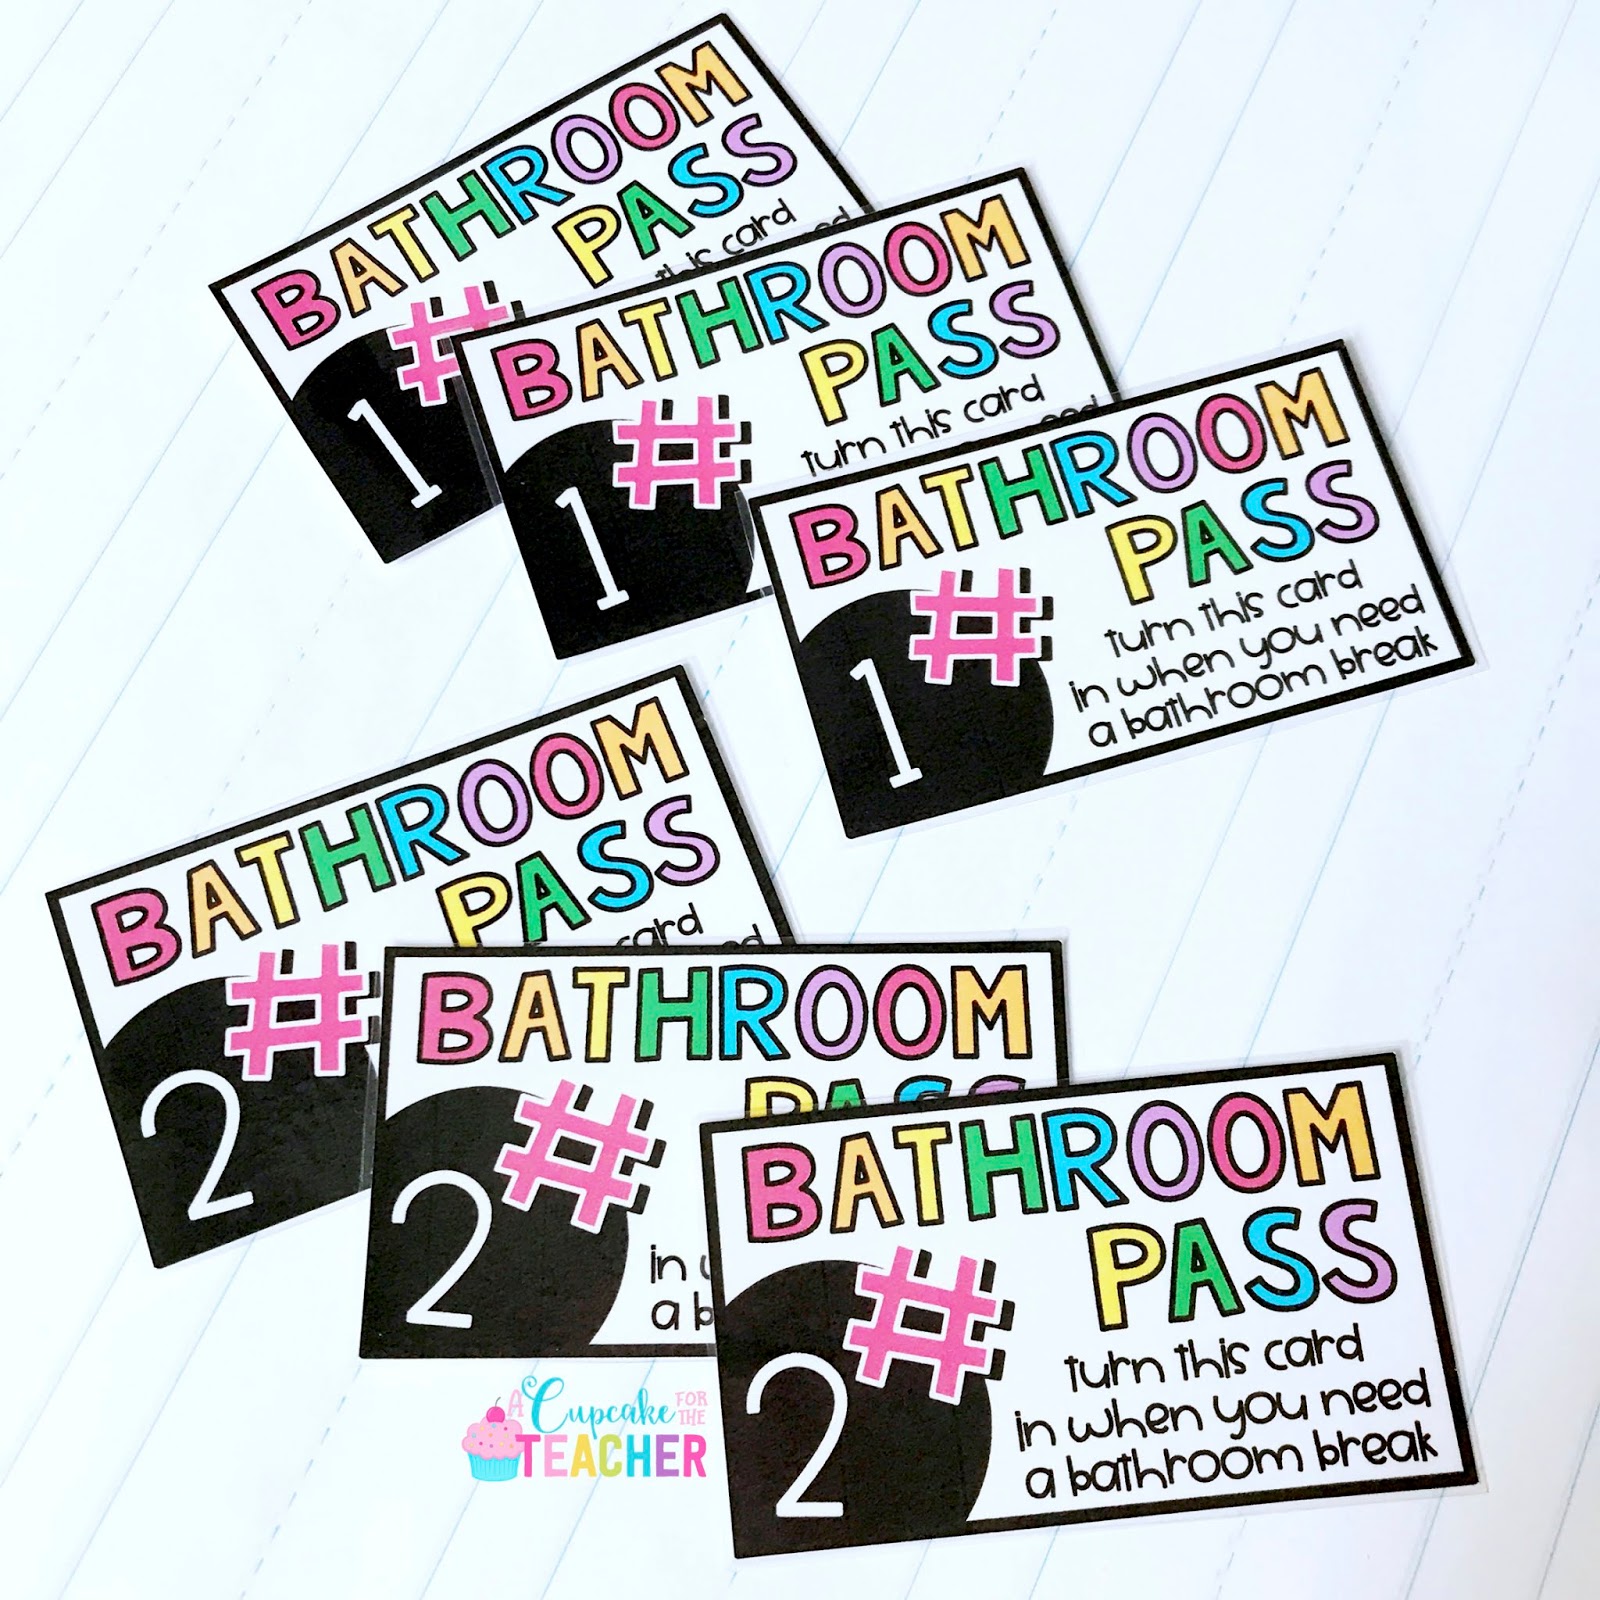 Check out these printable bathroom passes that you can find in my Bathroom Rules & Management Kit!